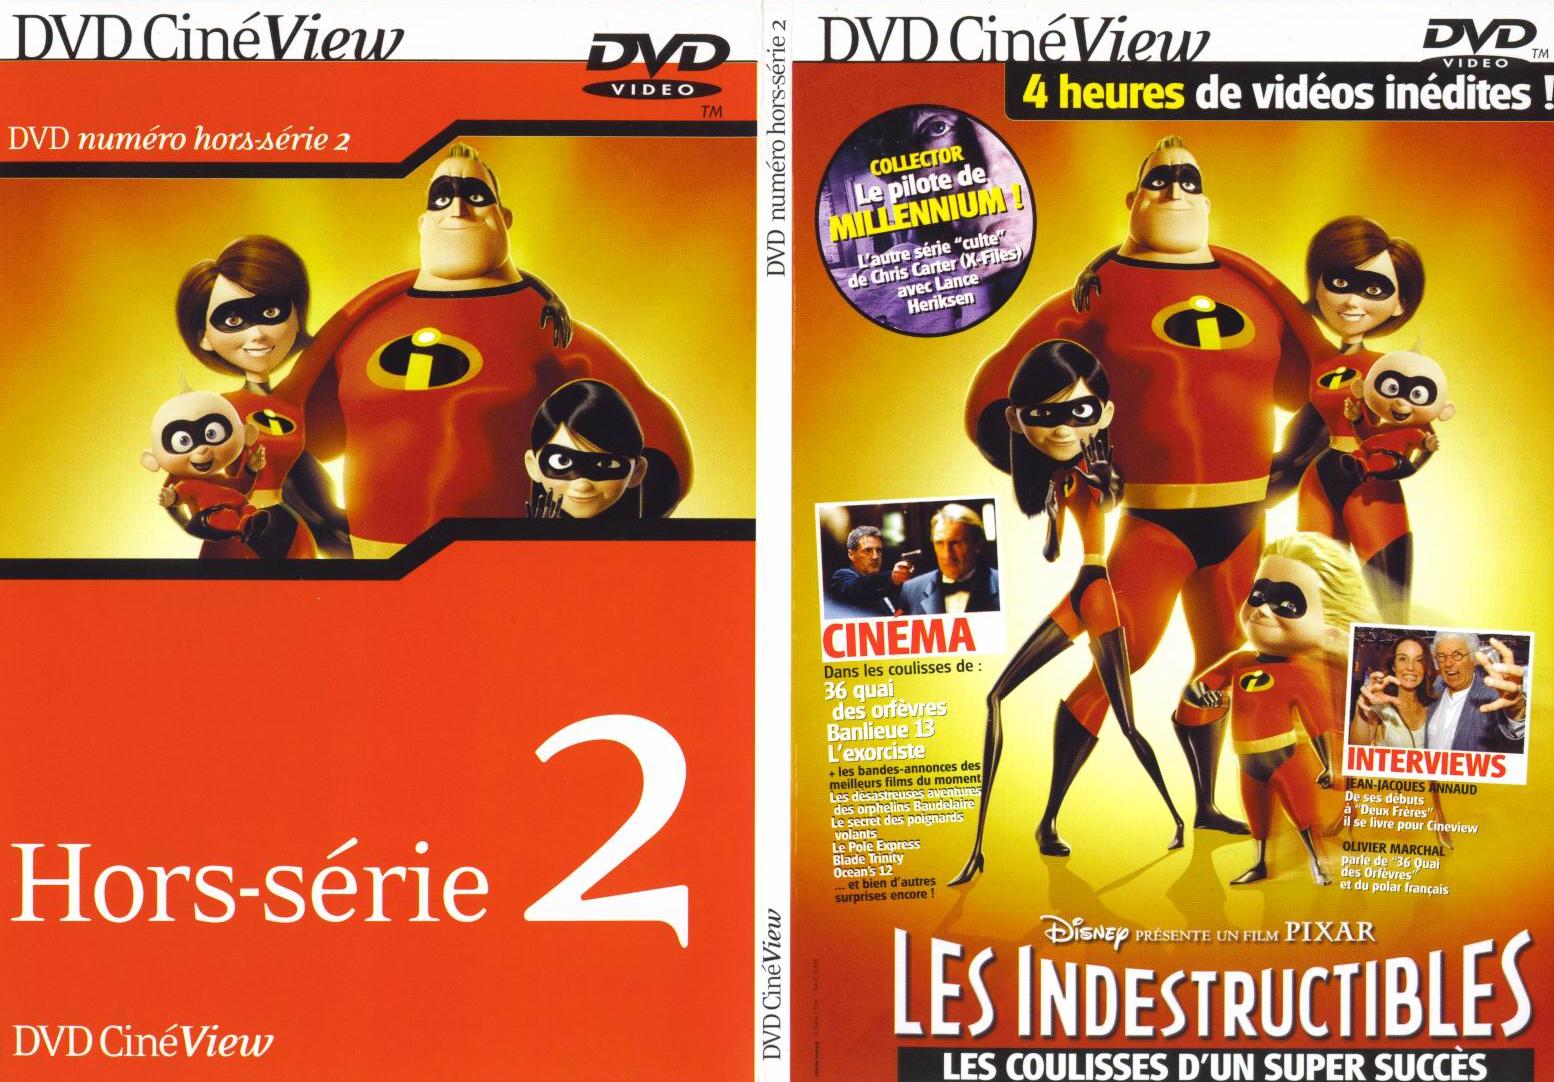 Jaquette DVD DVD cineview hors-serie 2